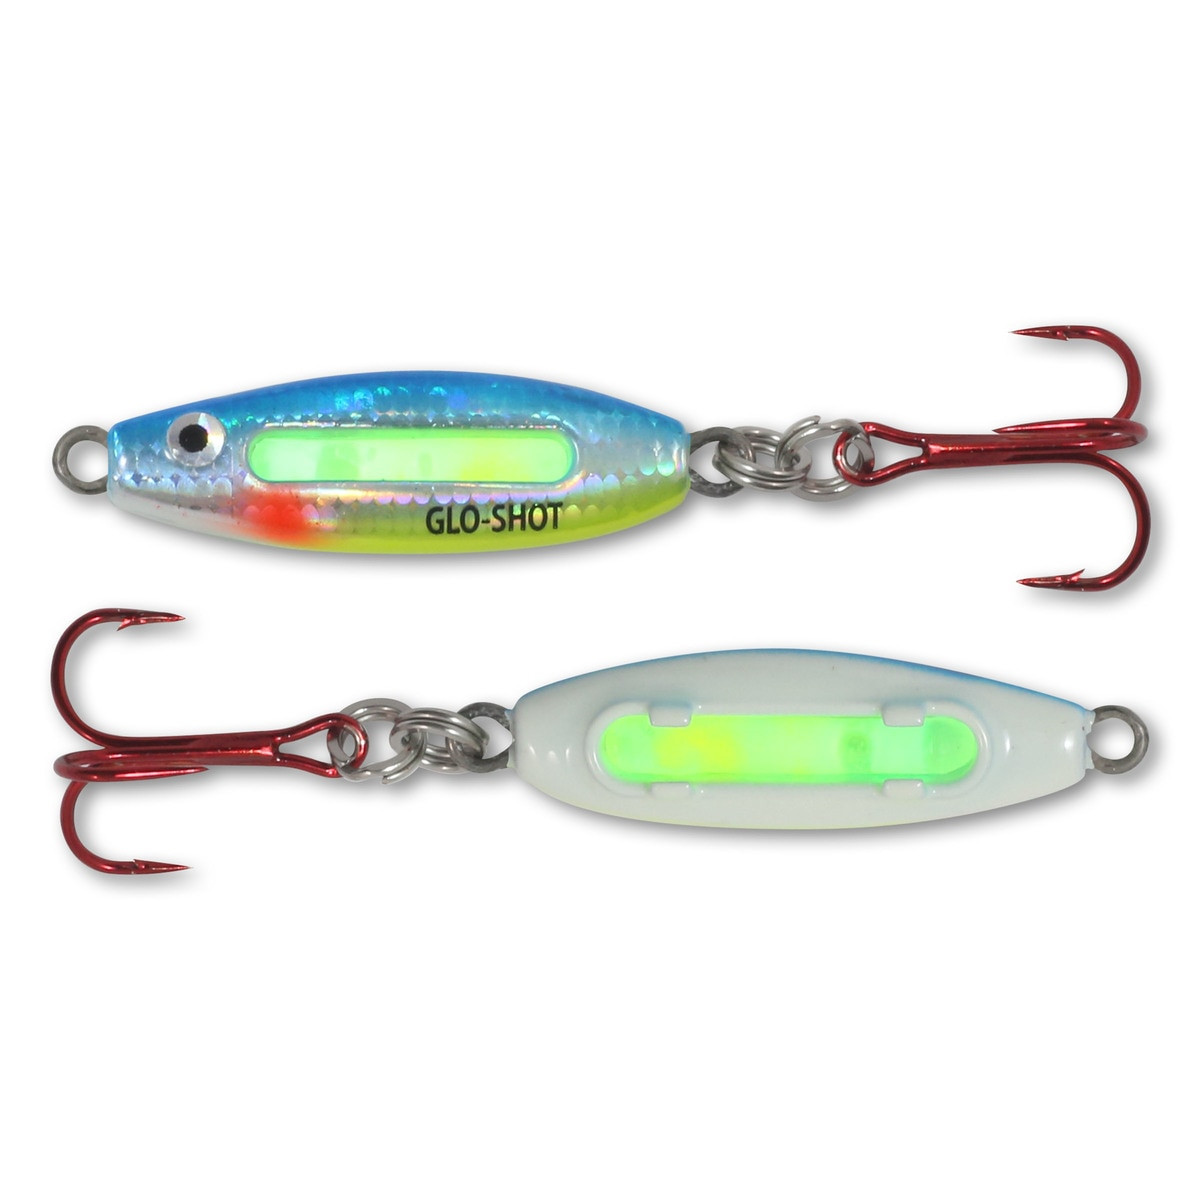 Northland Fishing Tackle Glo-Shot Fire-Belly Spoon - JT Outdoor